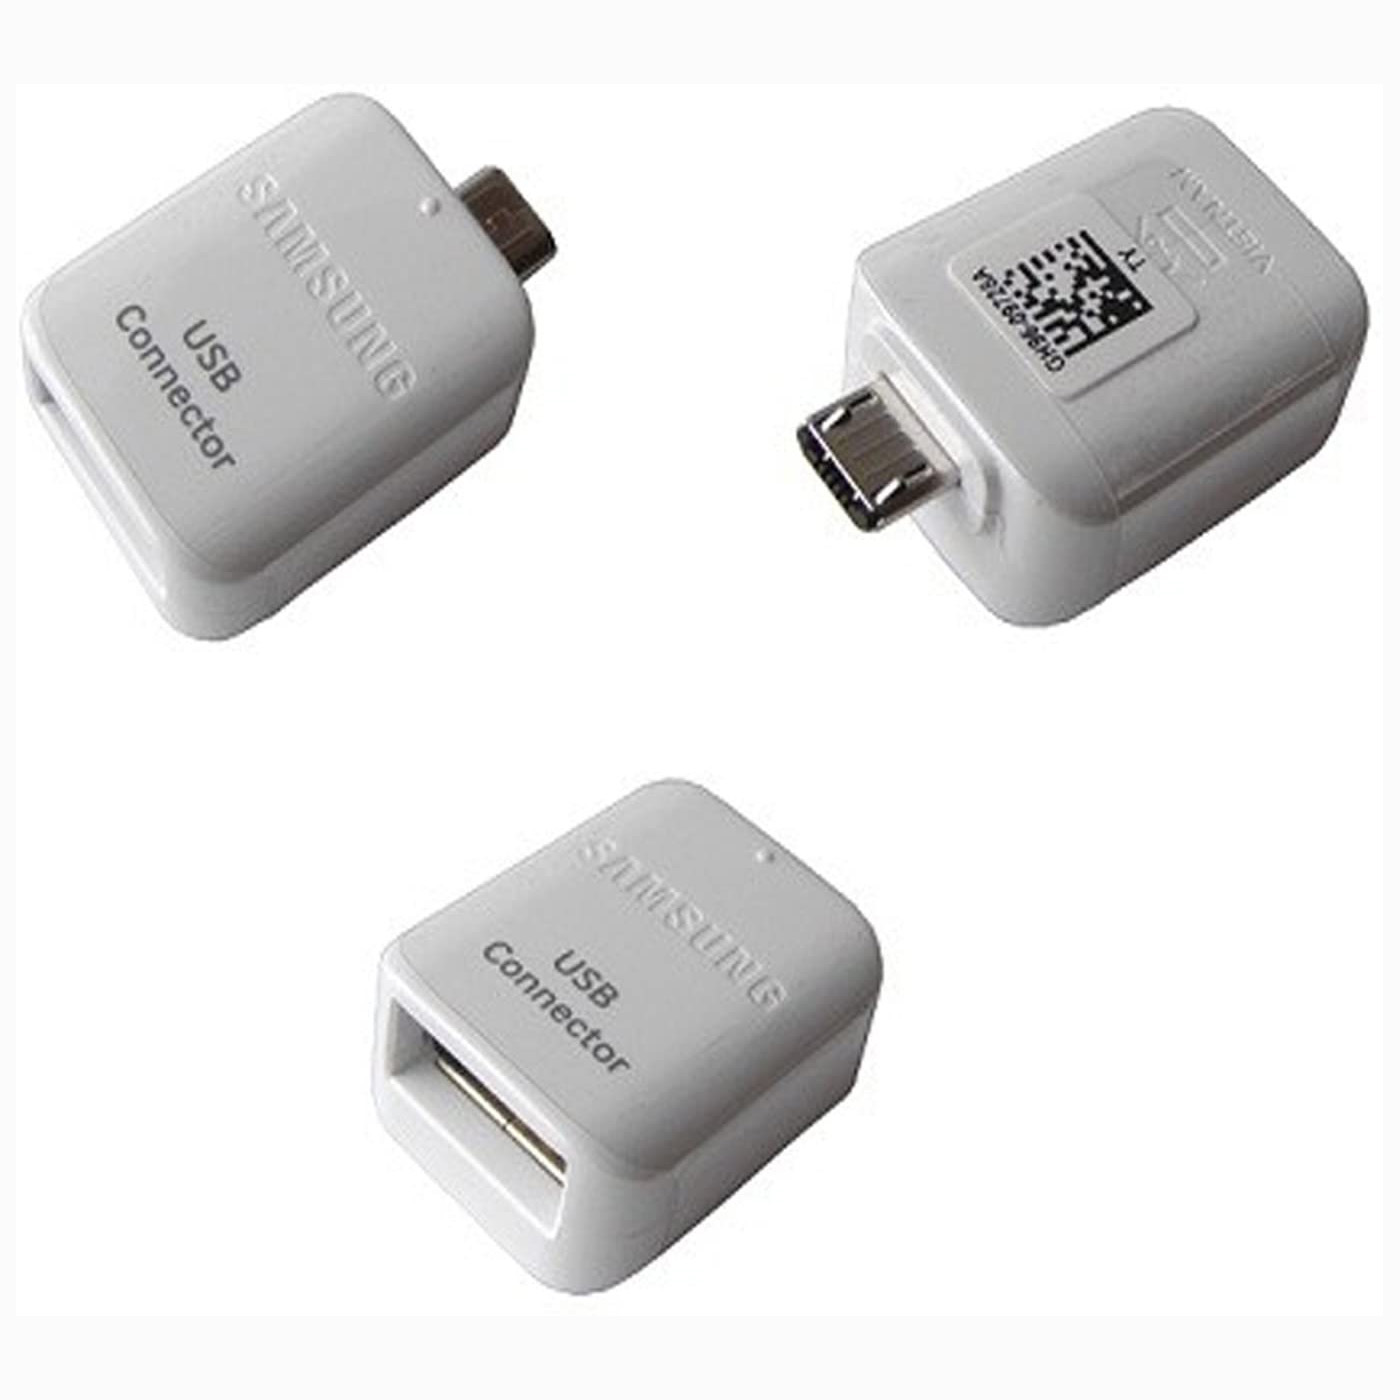 MINI OTG ADAPTER MICRO FOR TABLET PC & MOBILE جوده عاليه ,Cable